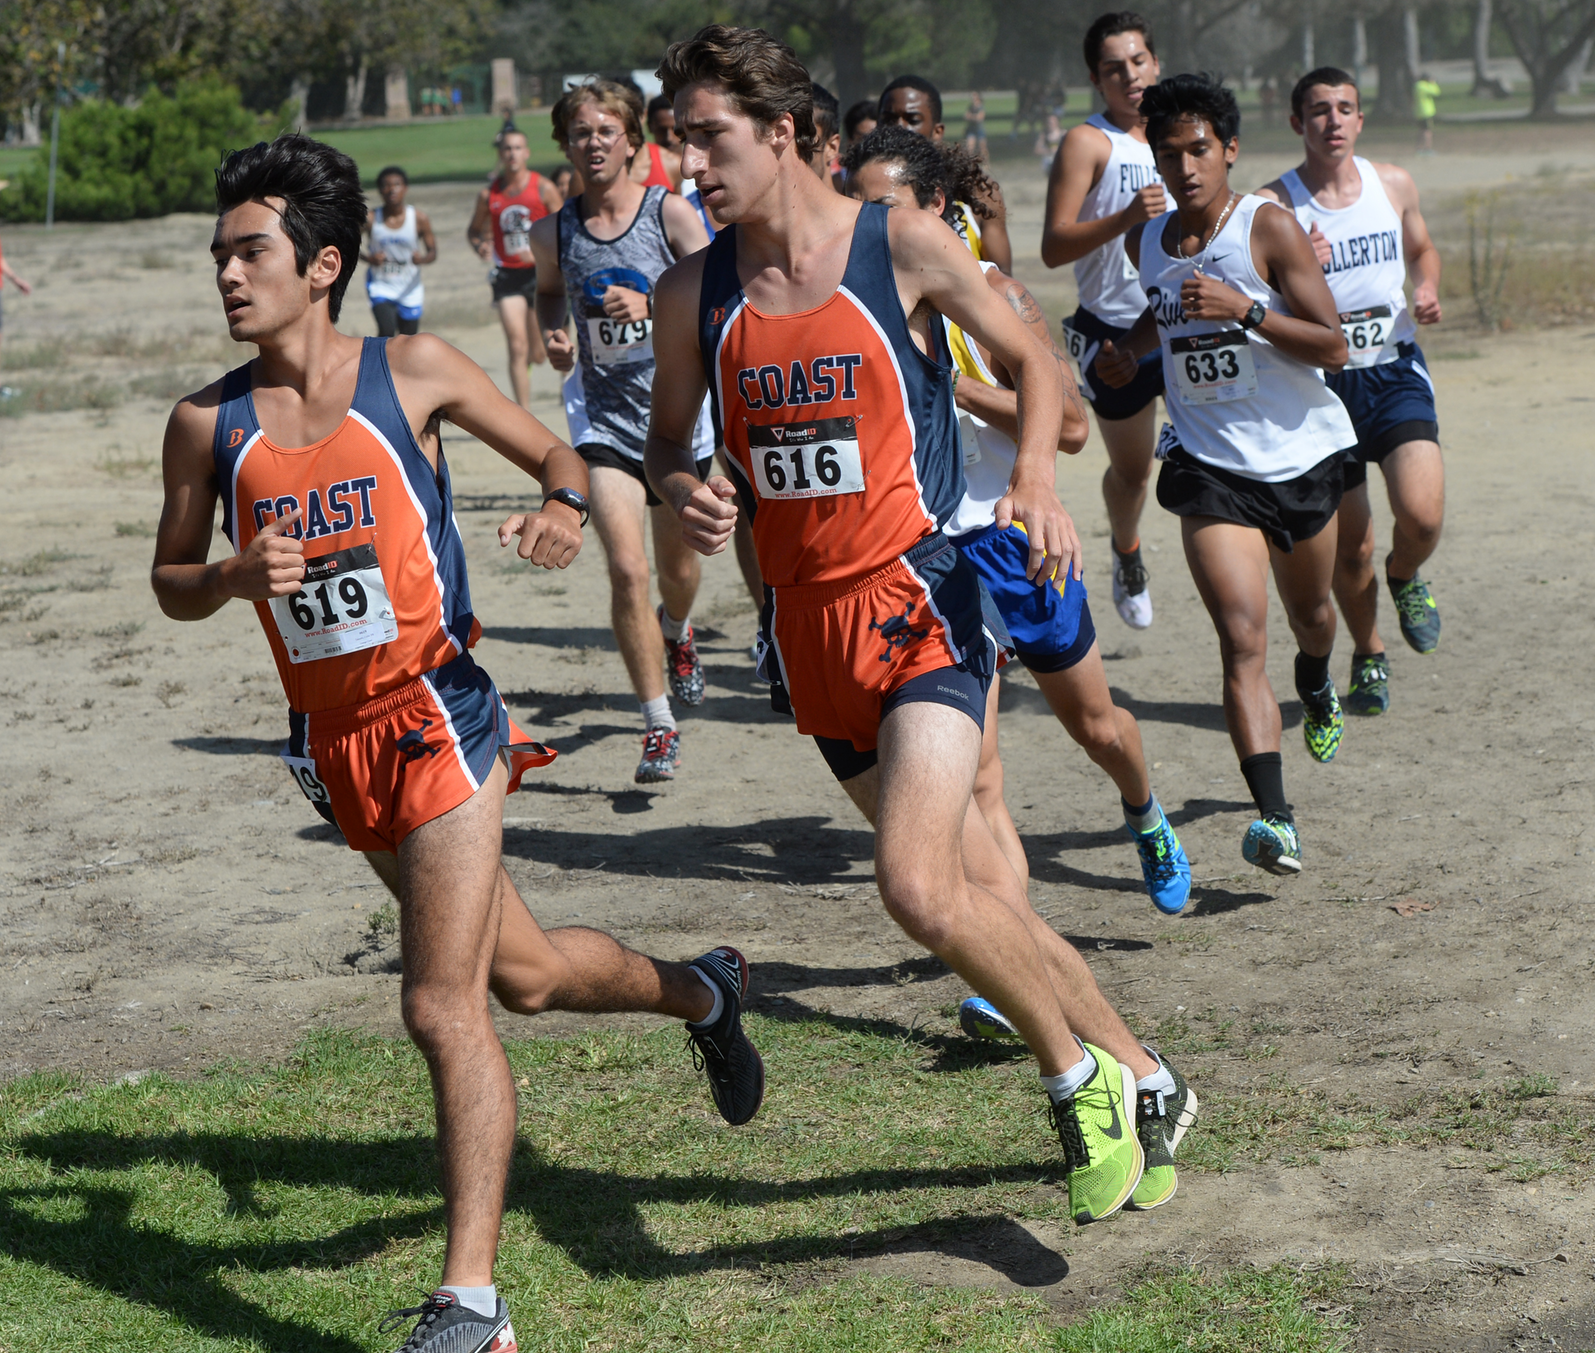 Pirates take seventh overall at SoCal Meet